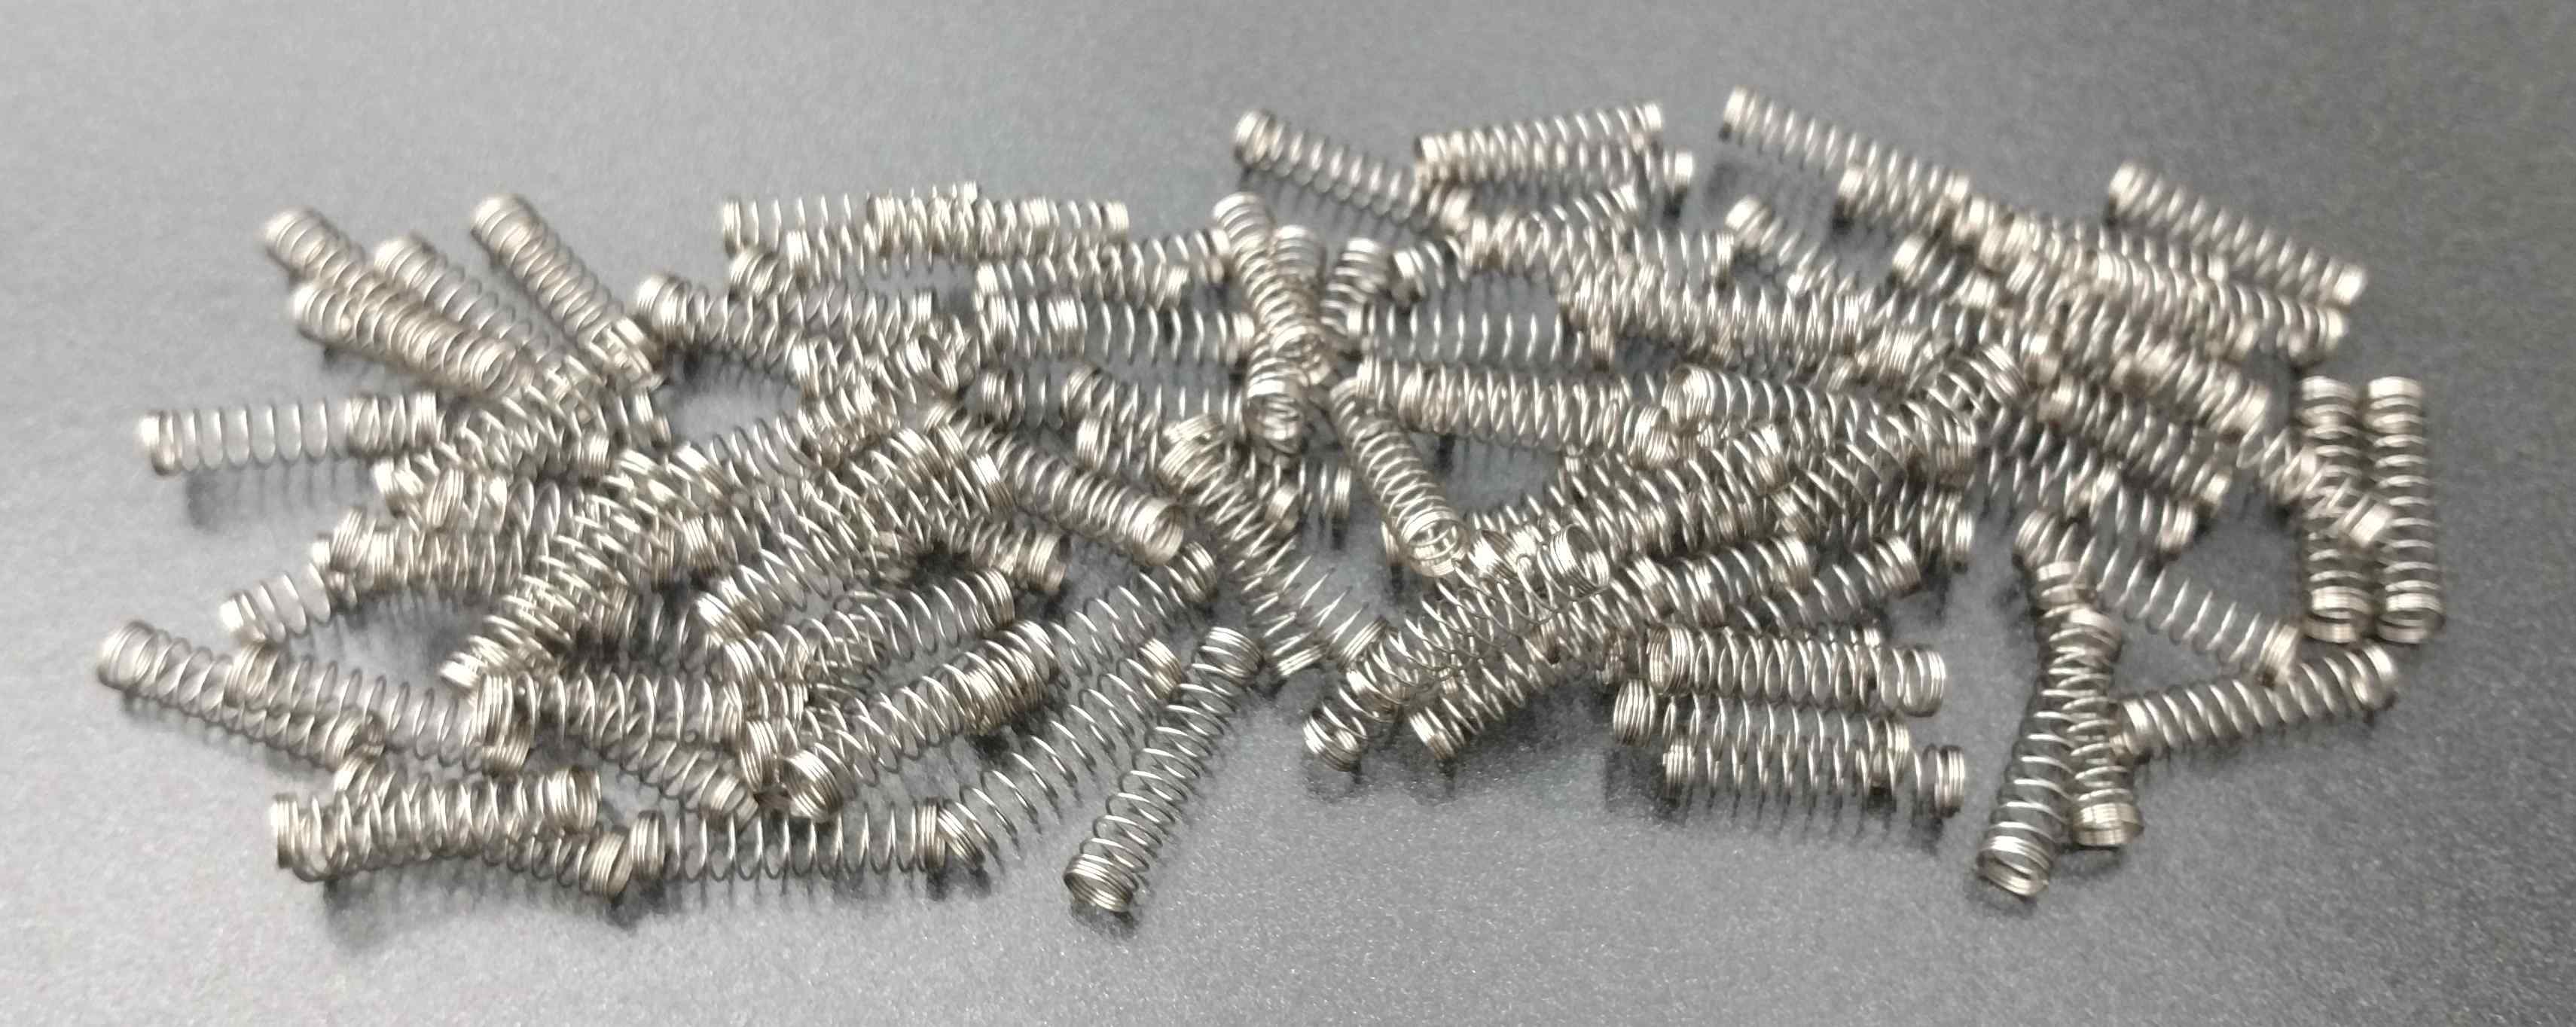 A pile of springs. Some are annoyingly intertwined.